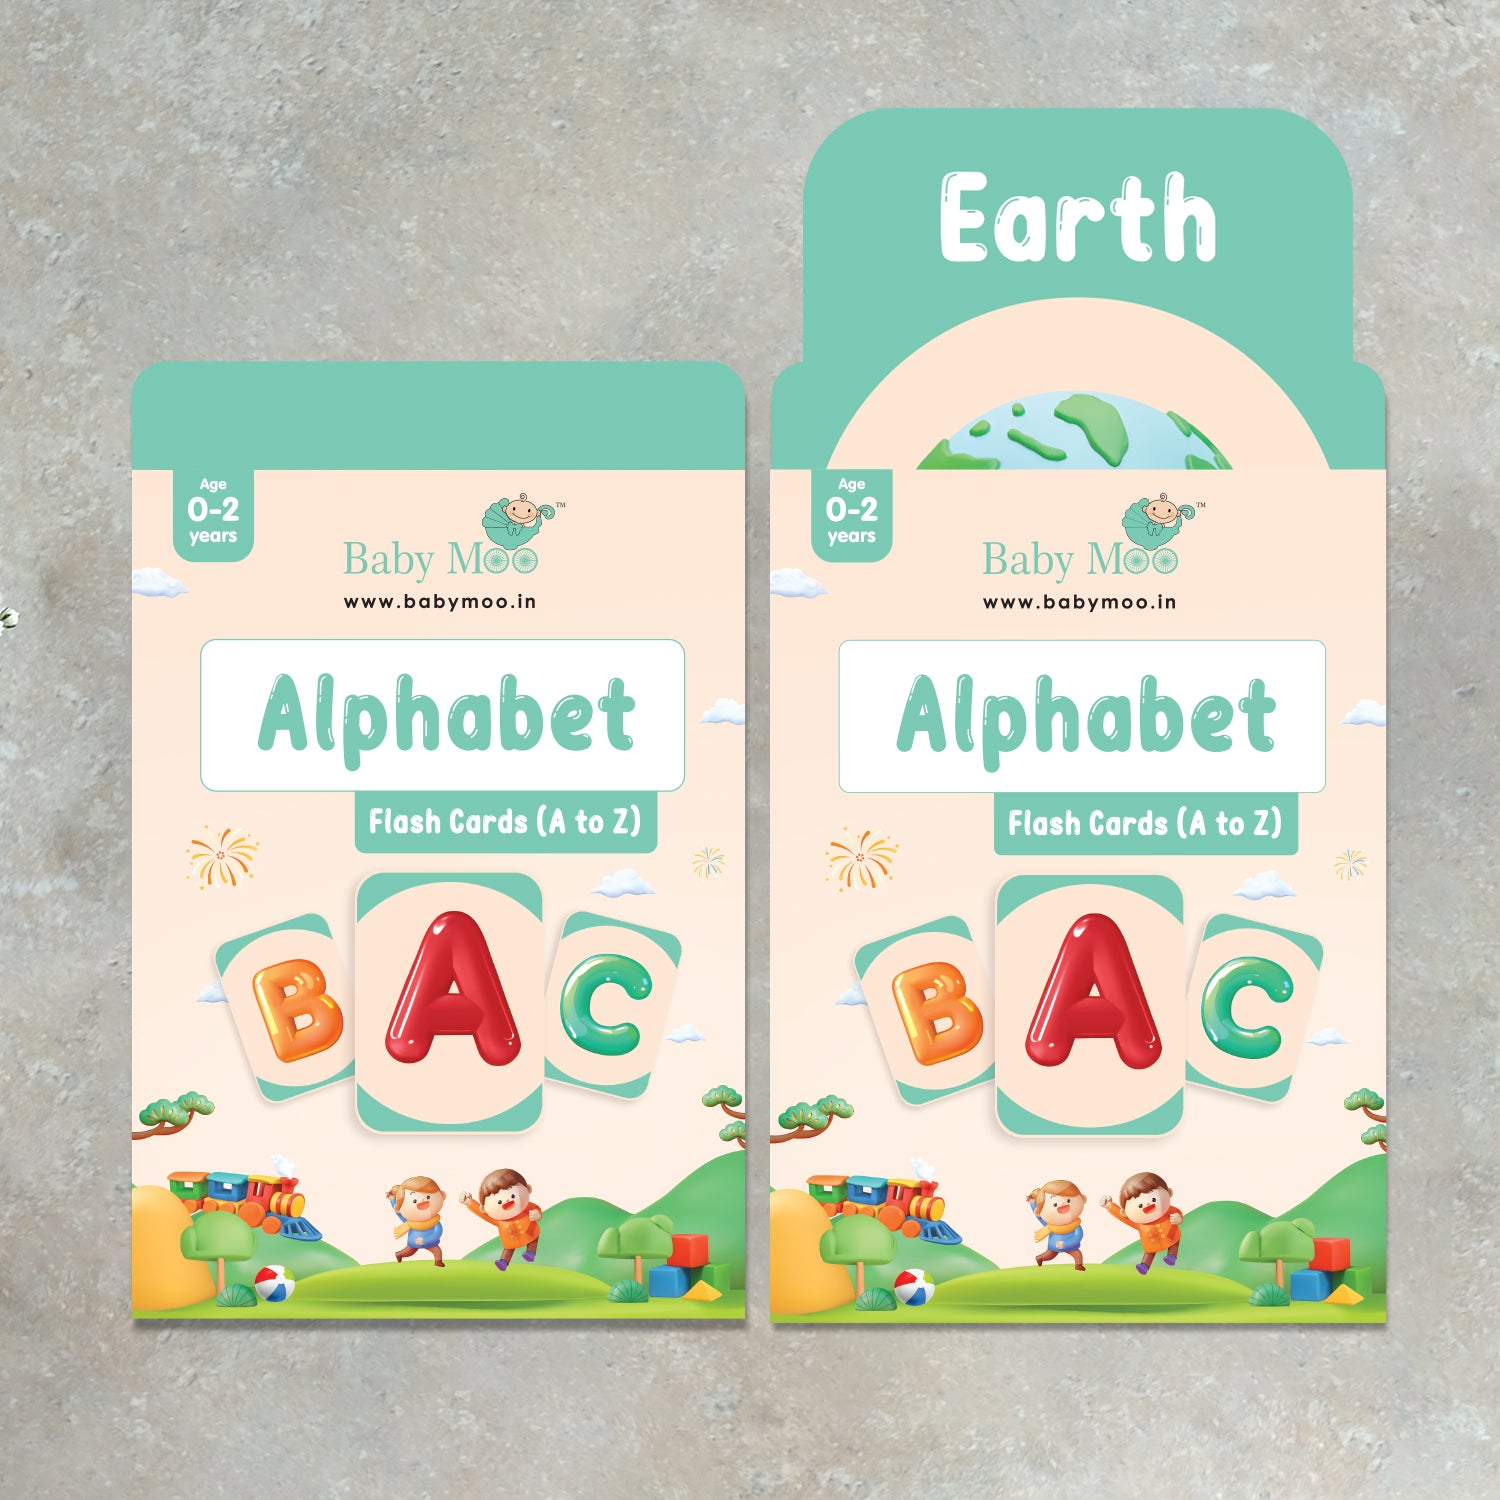 Baby Moo Alphabet A To Z 26 Flash Cards - Green, Peach